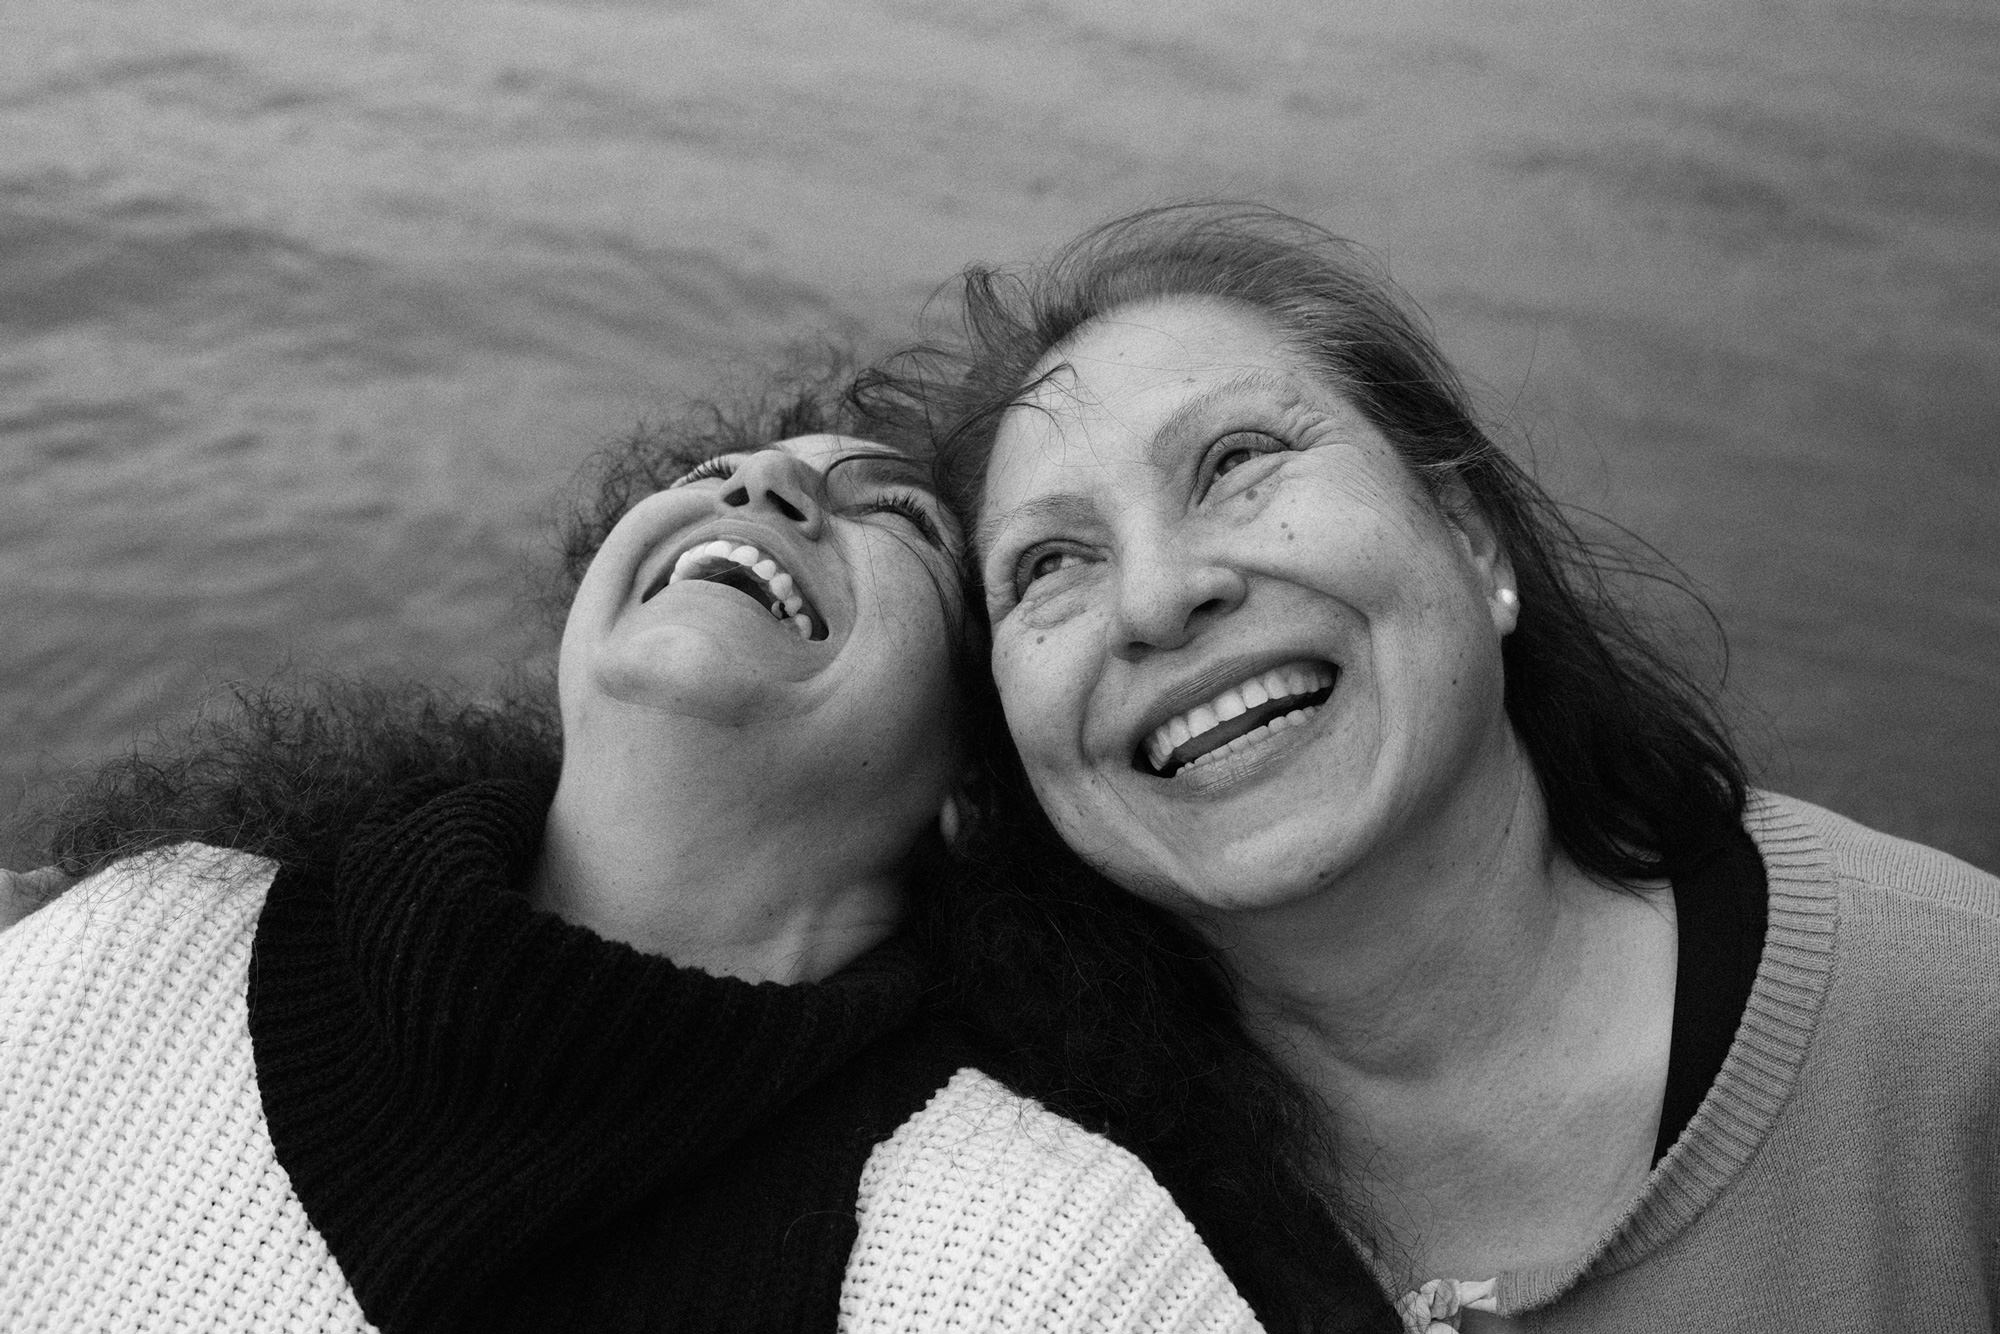 Image description: black-and-white image of the artist’s mother laughing with her aunt, looking up at the sky. Photo by Maryv Benoit.